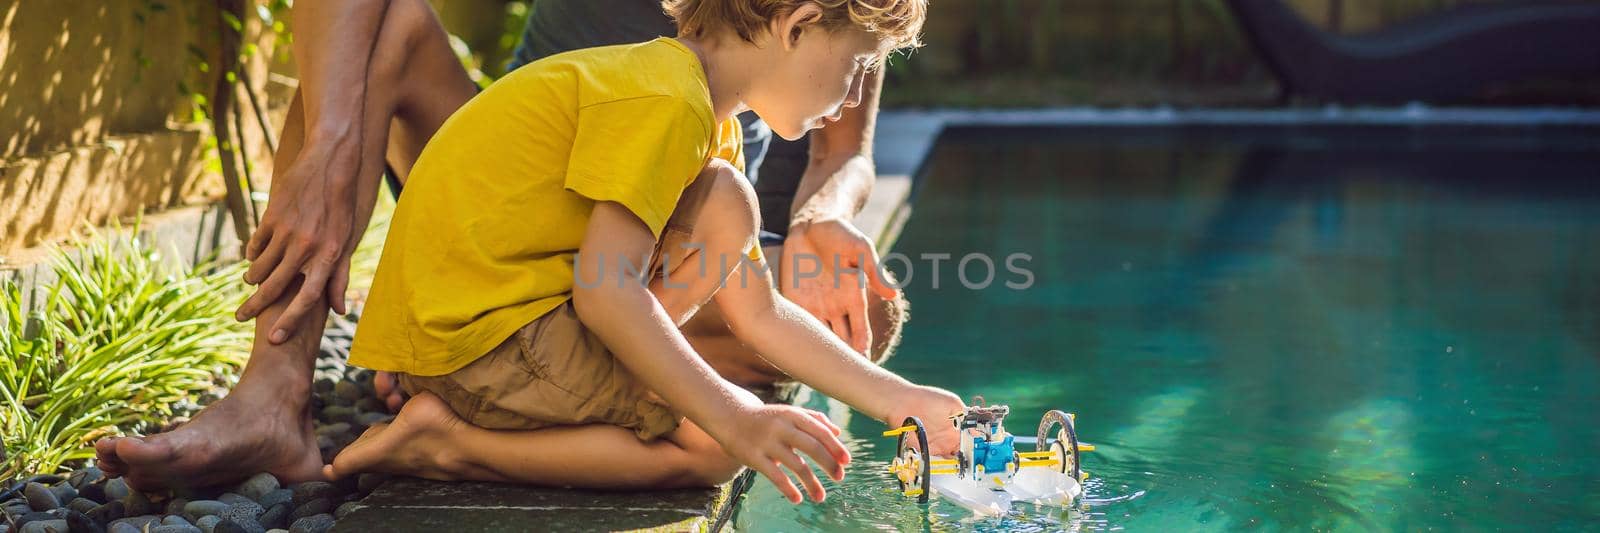 Dad and son playing with a boat in the pool BANNER, LONG FORMAT by galitskaya